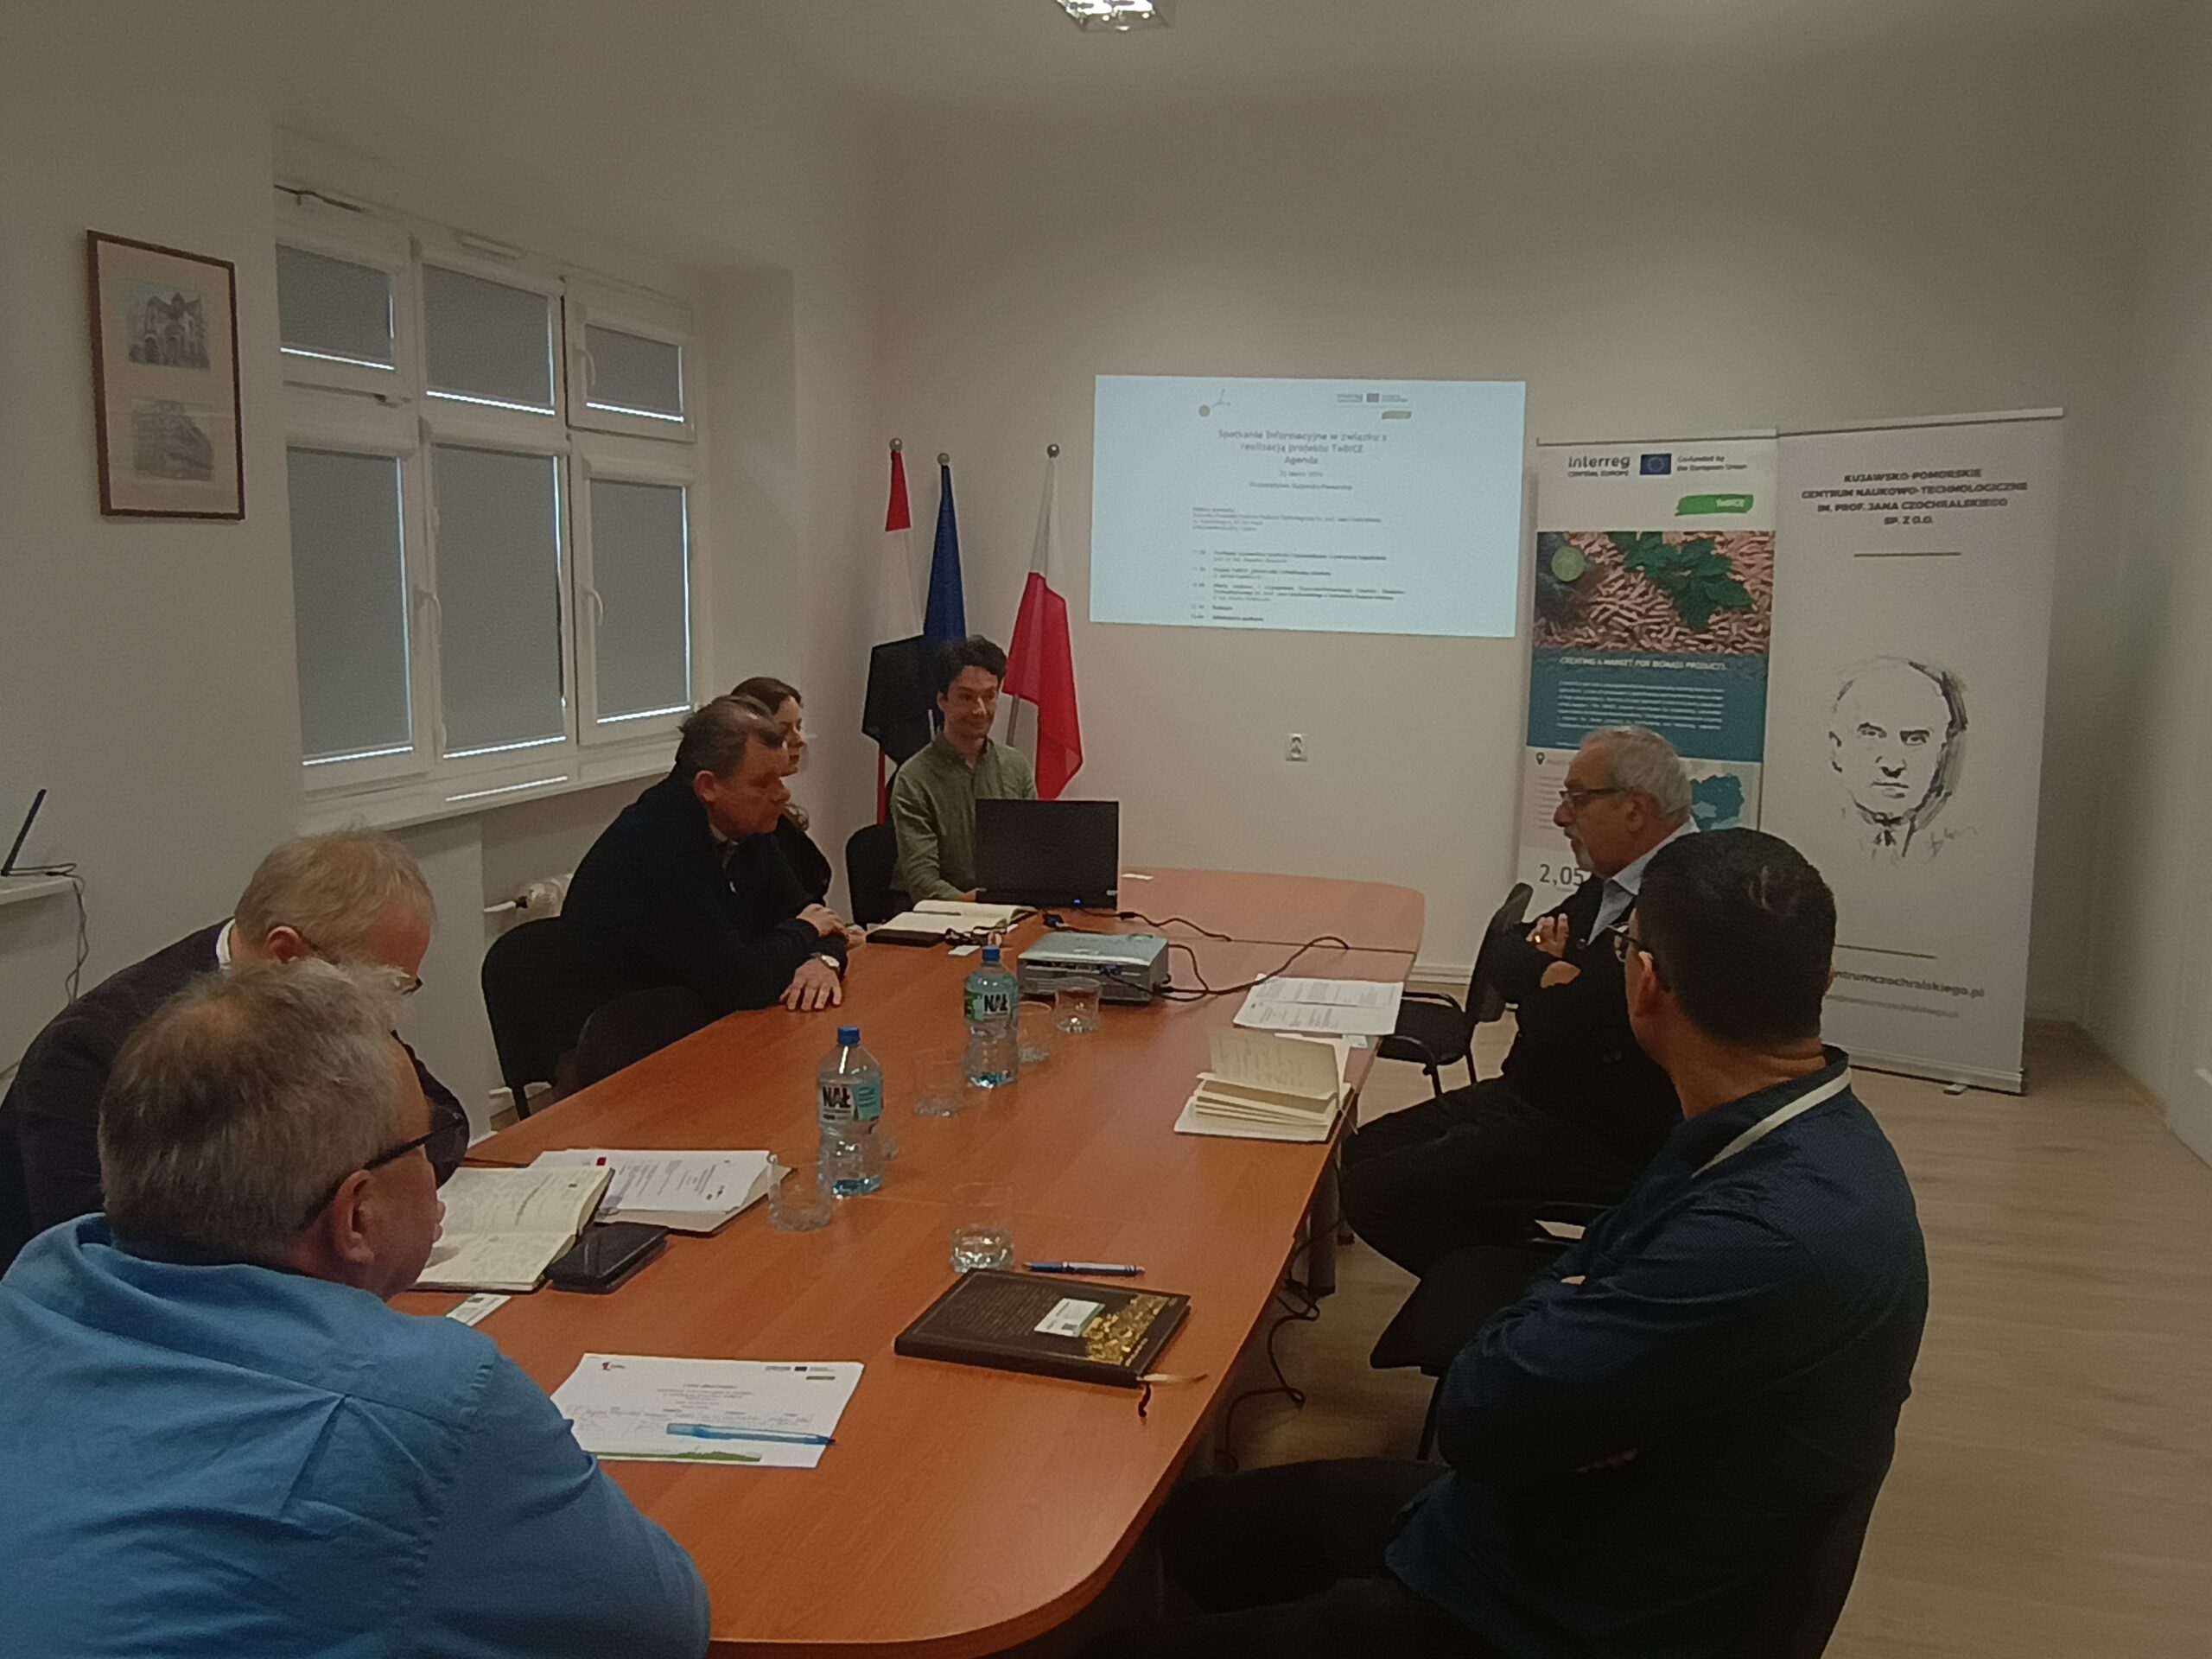 Meeting with the stakeholders from Biogas and agricultural production sector in Poland.